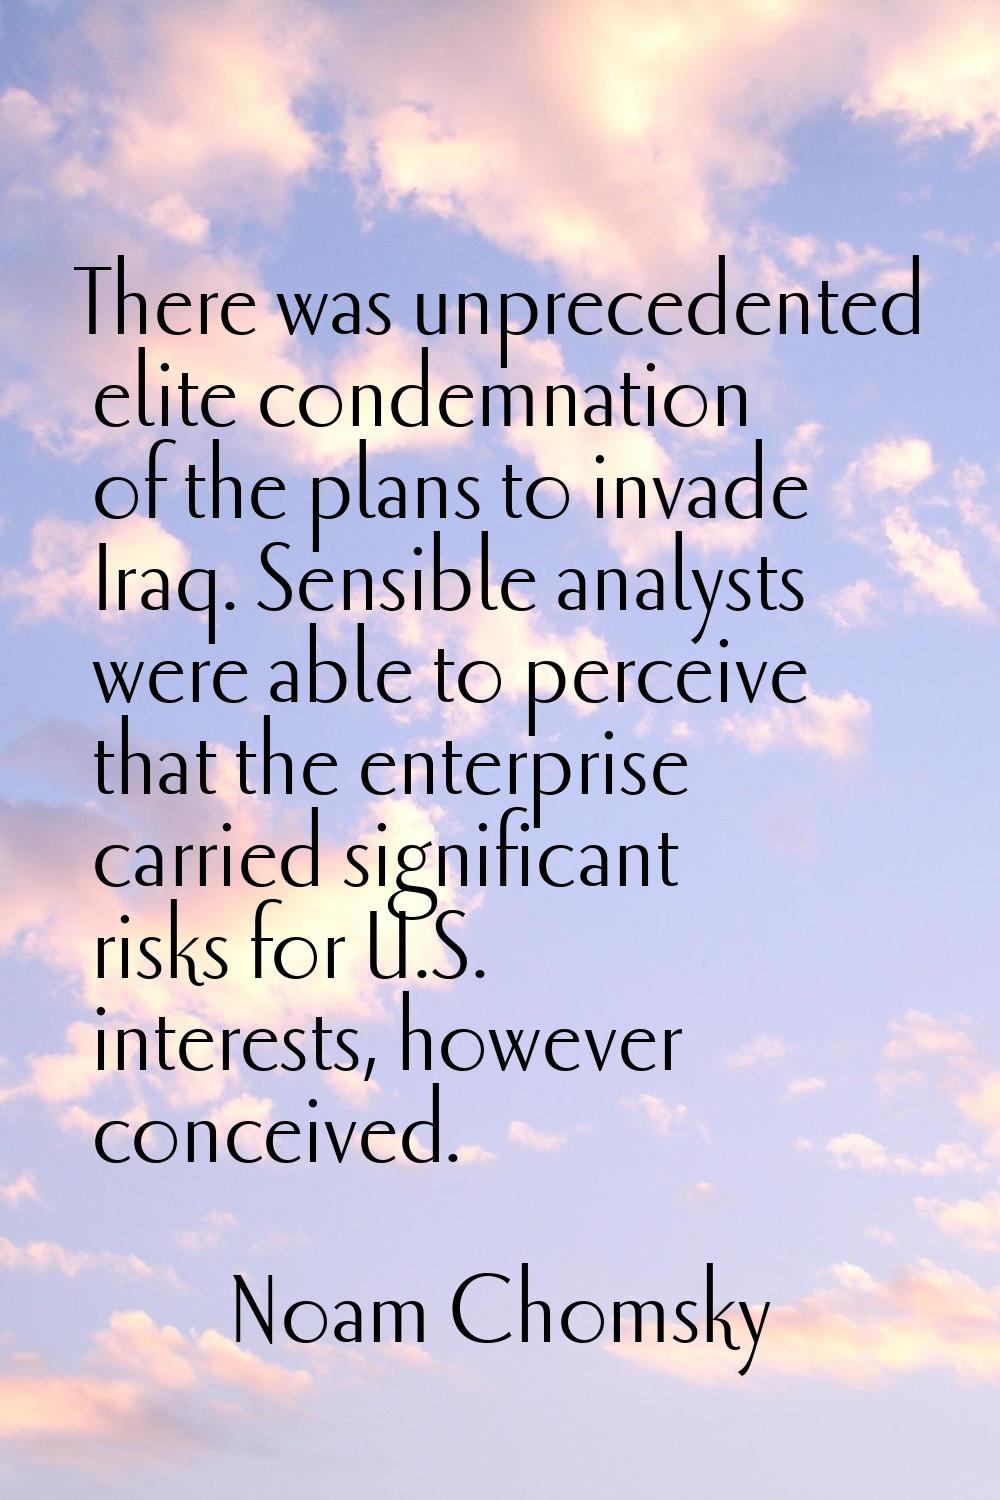 There was unprecedented elite condemnation of the plans to invade Iraq. Sensible analysts were able